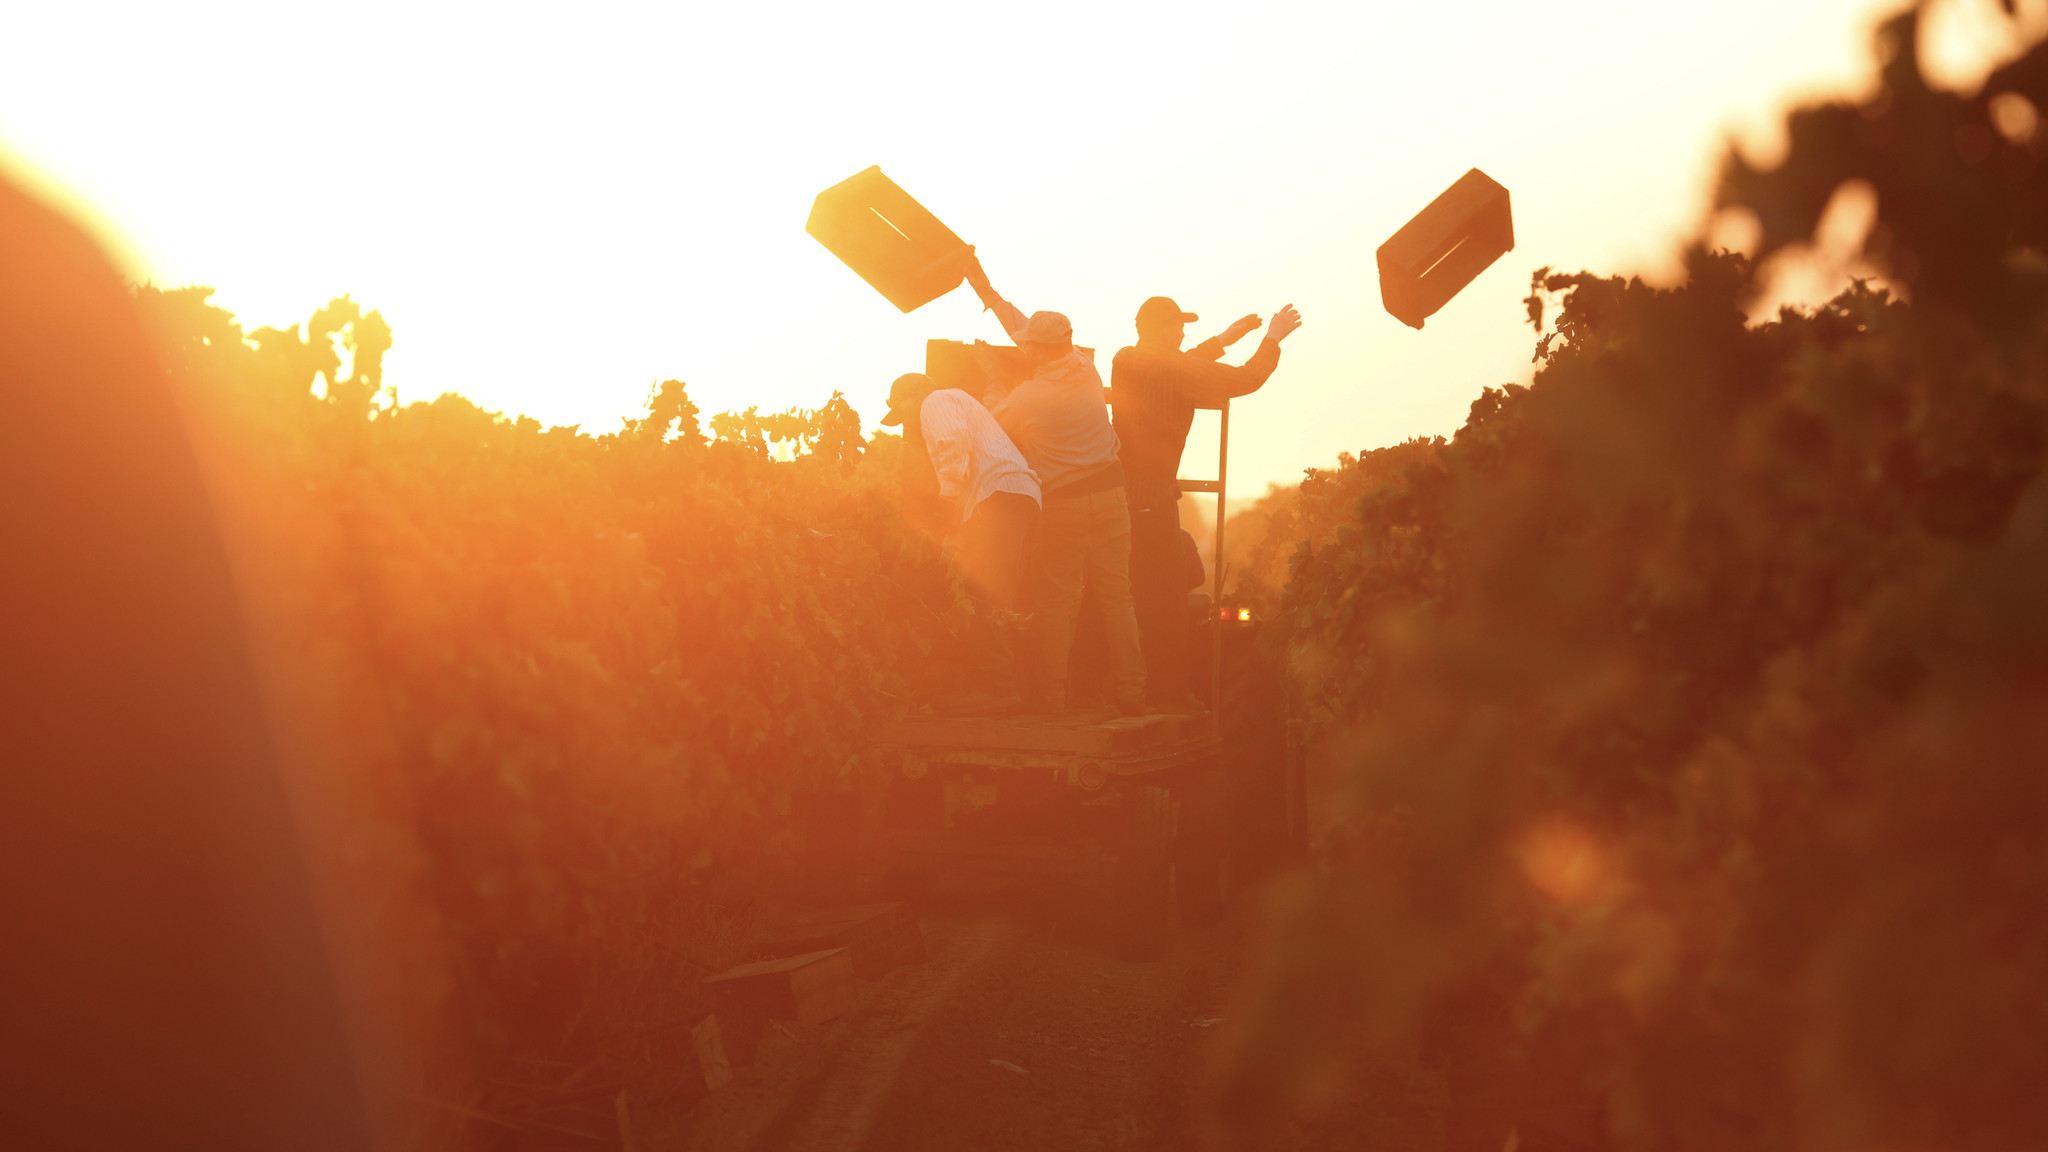 Farmworkers toss wooden crates into the fields for workers to use in picking grapes in Madera.